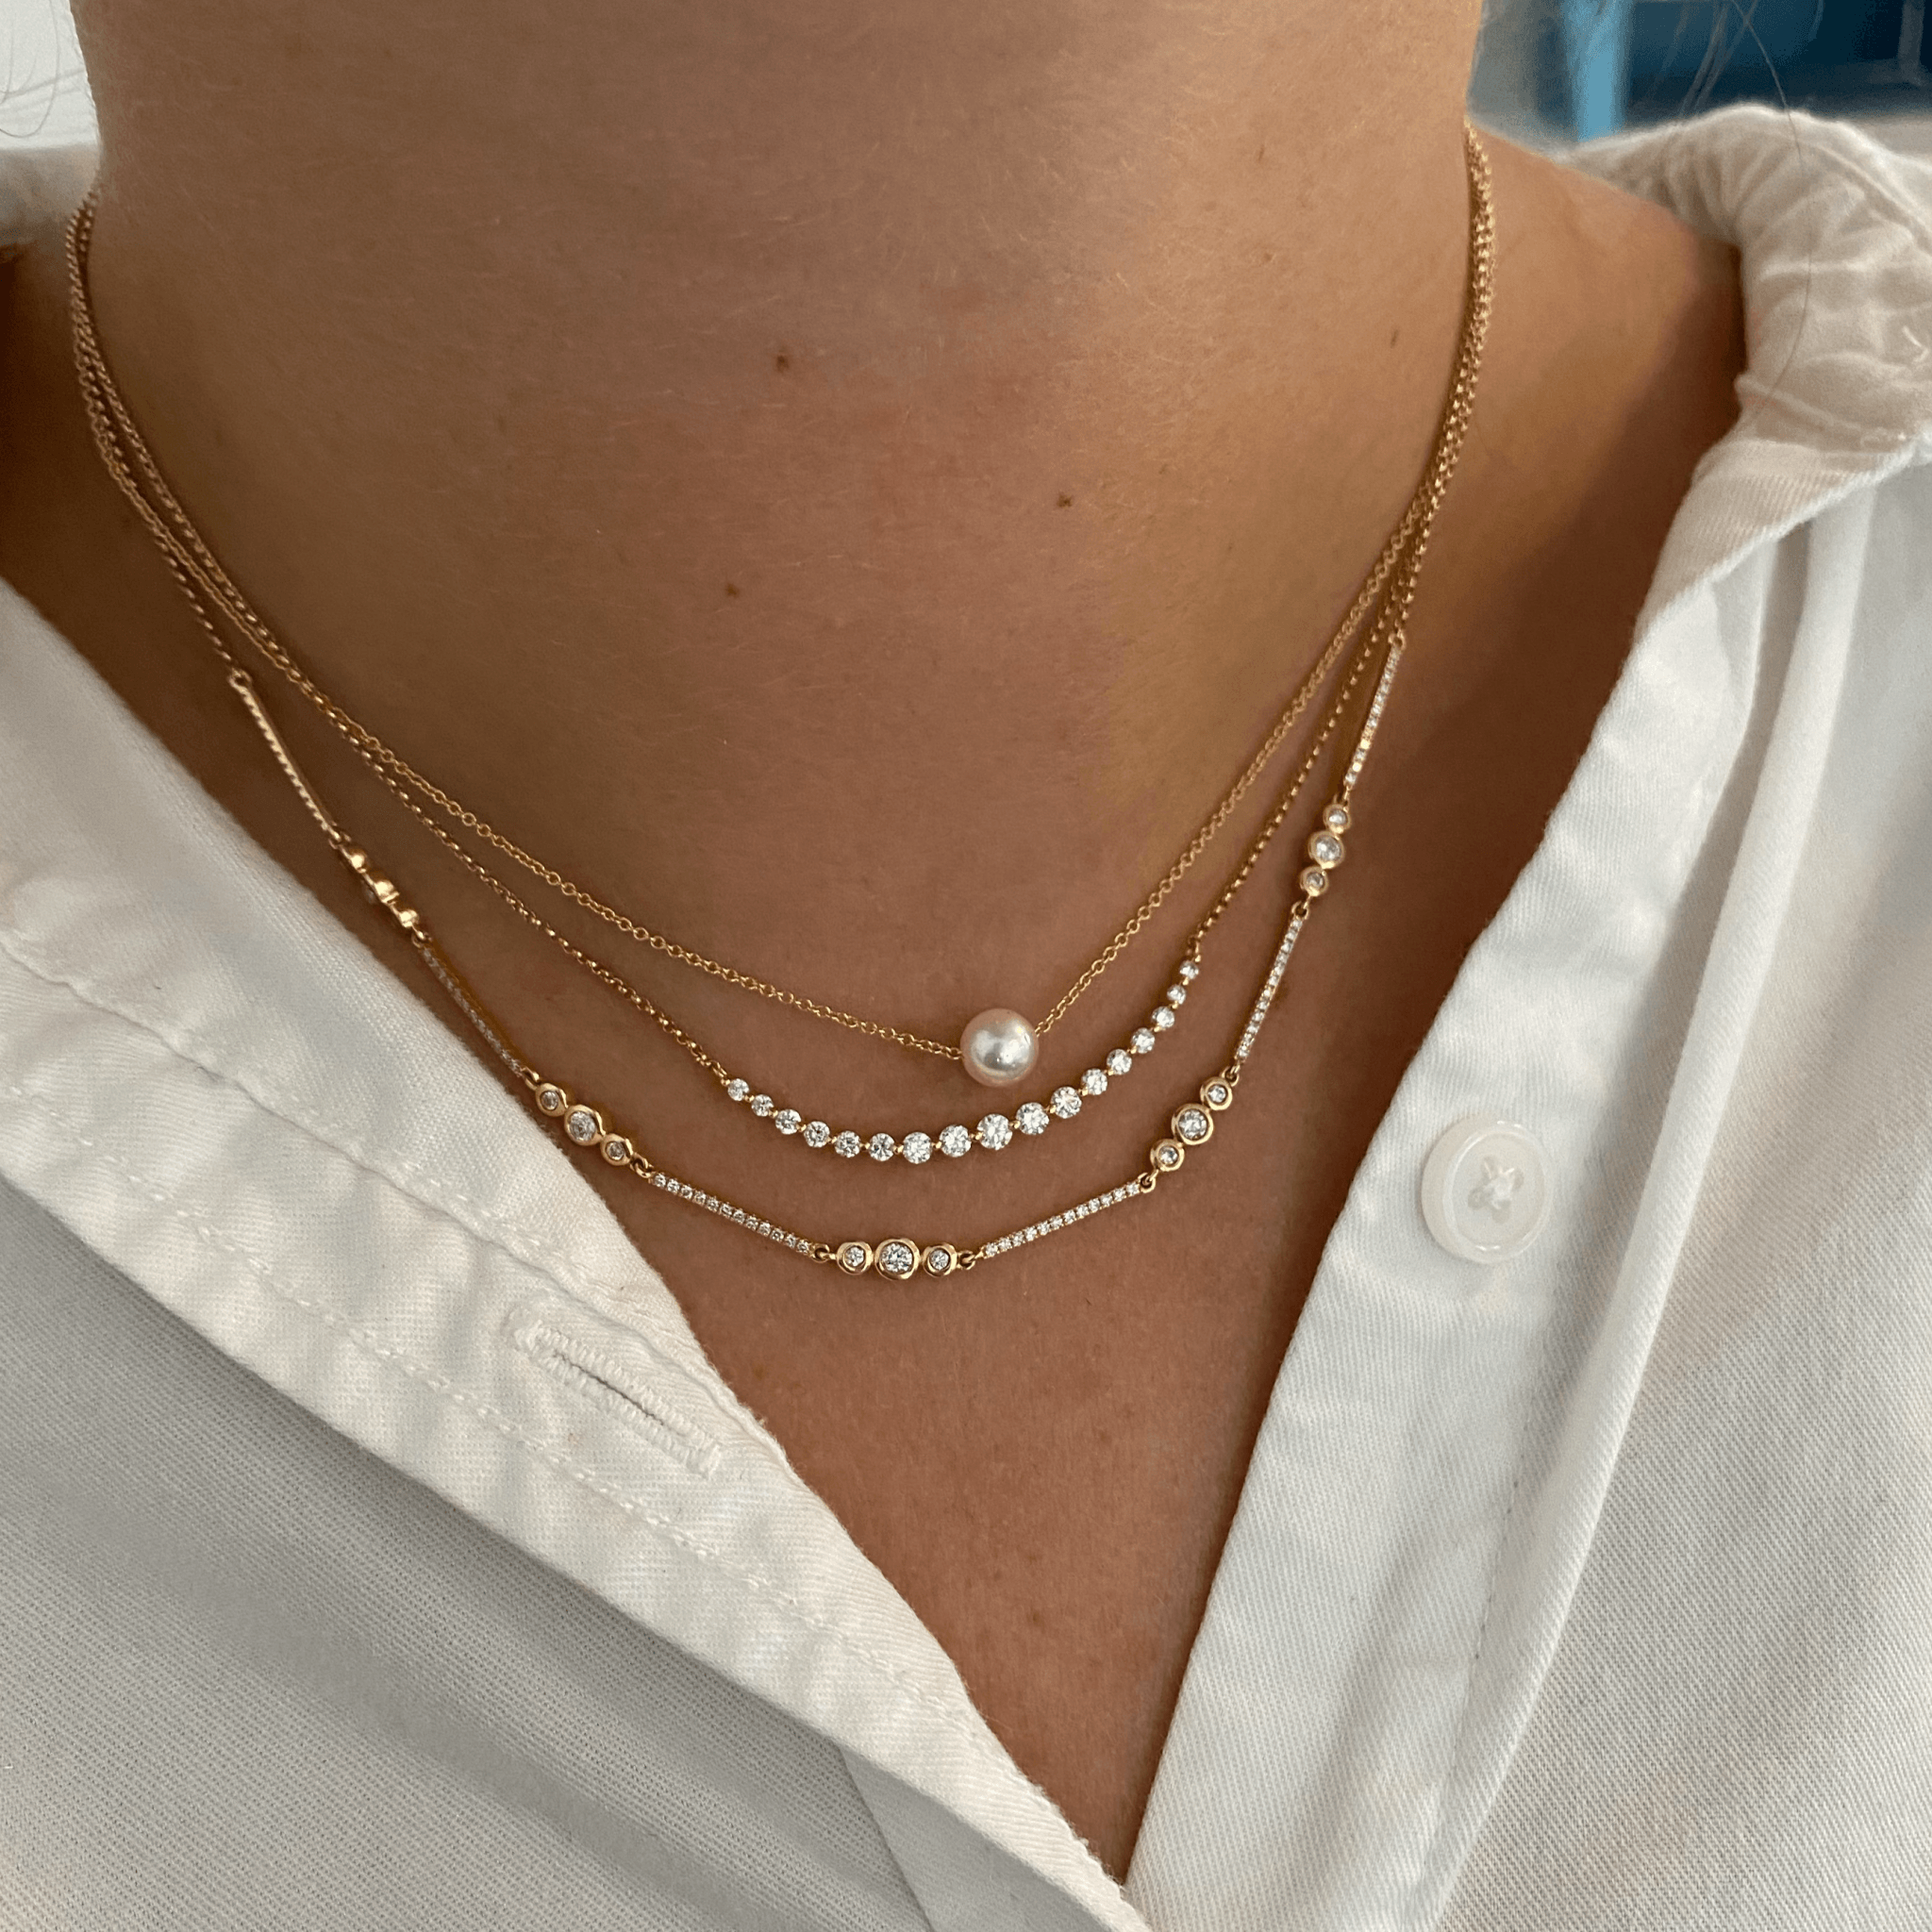 South sea pearls chain | Pearl necklace designs, Pearl jewelry sets, Pearl  jewelry design